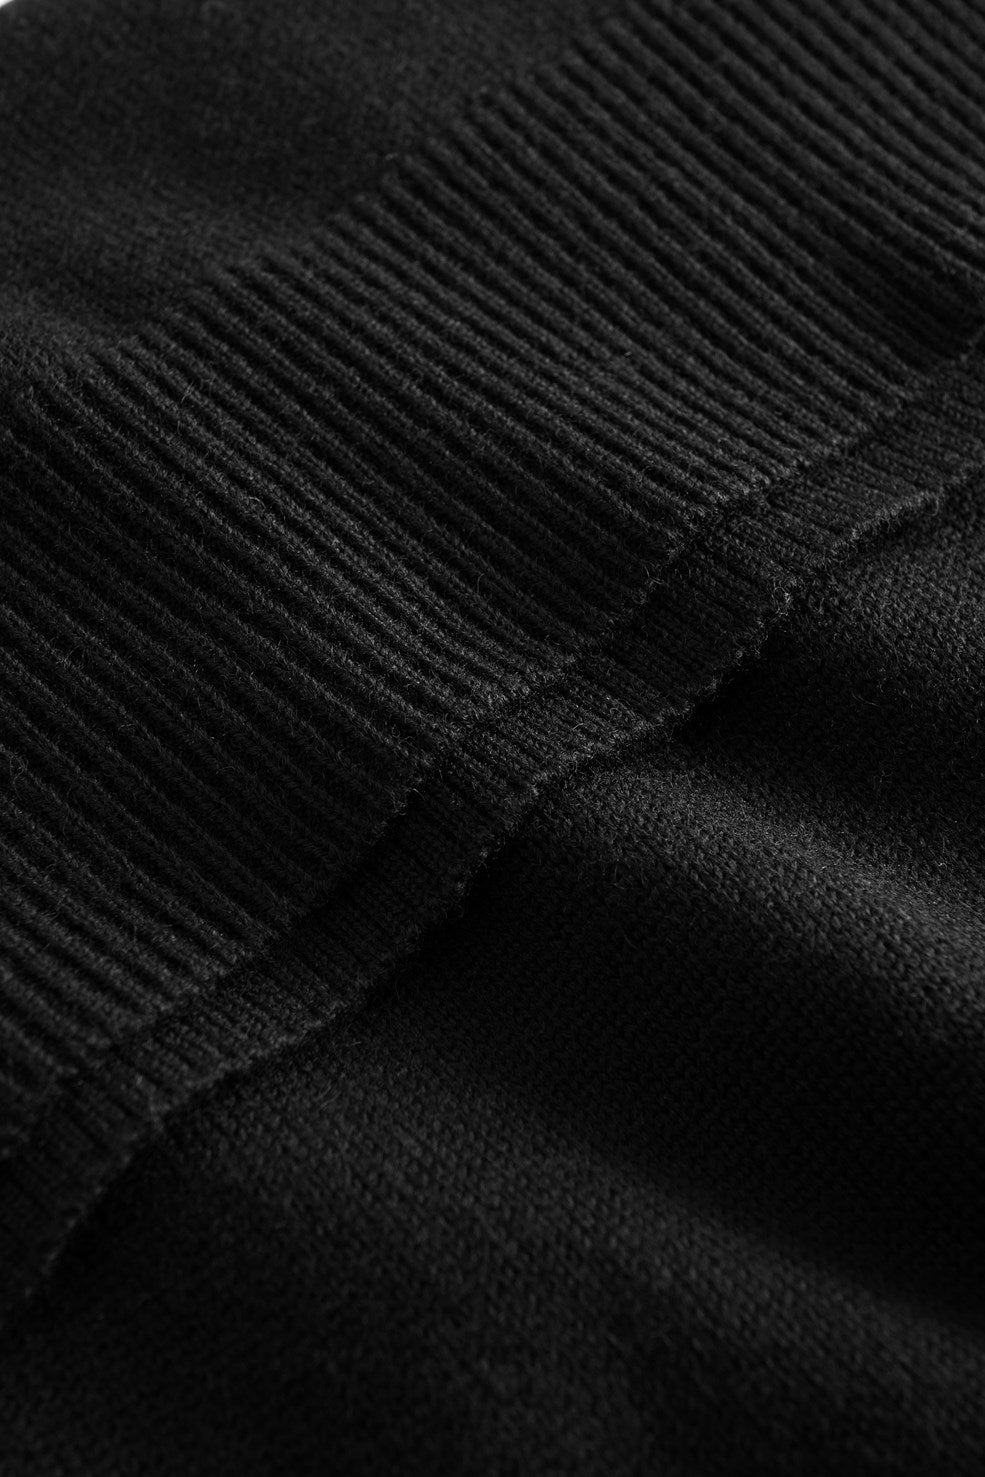 CLEMENTINE JUMPER IN BLACK BY WOOD WOOD